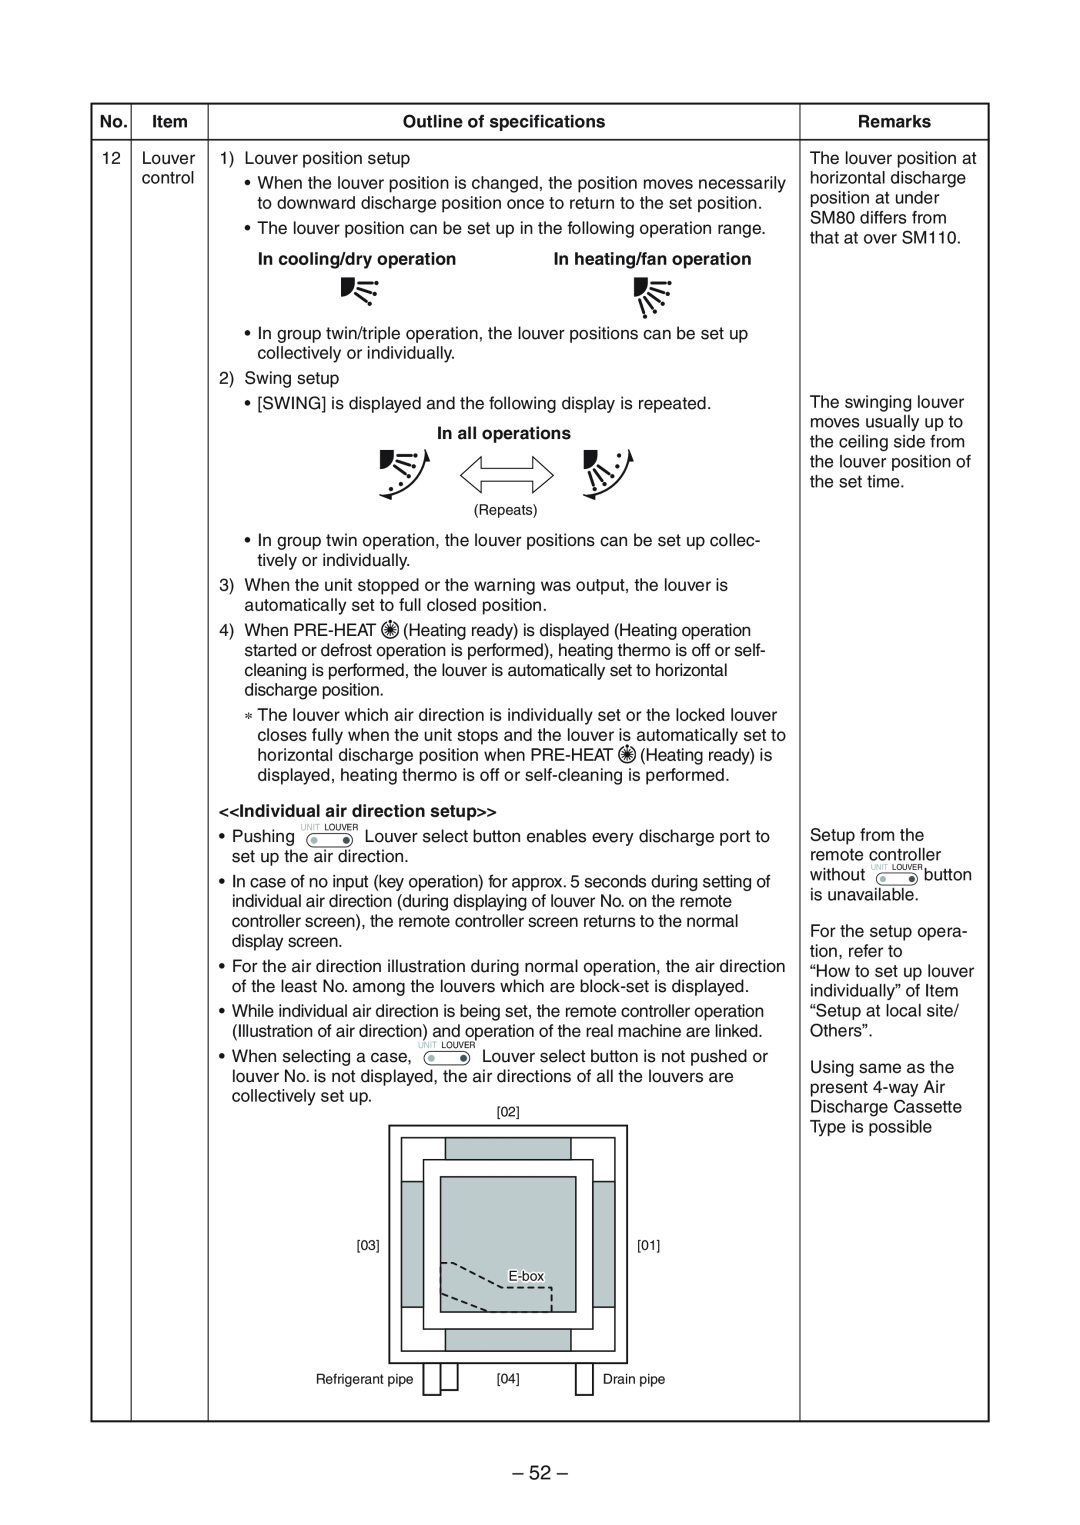 Toshiba RAV-SP1104ATZ-E 52, Outline of specifications, Remarks, In cooling/dry operation, In heating/fan operation 